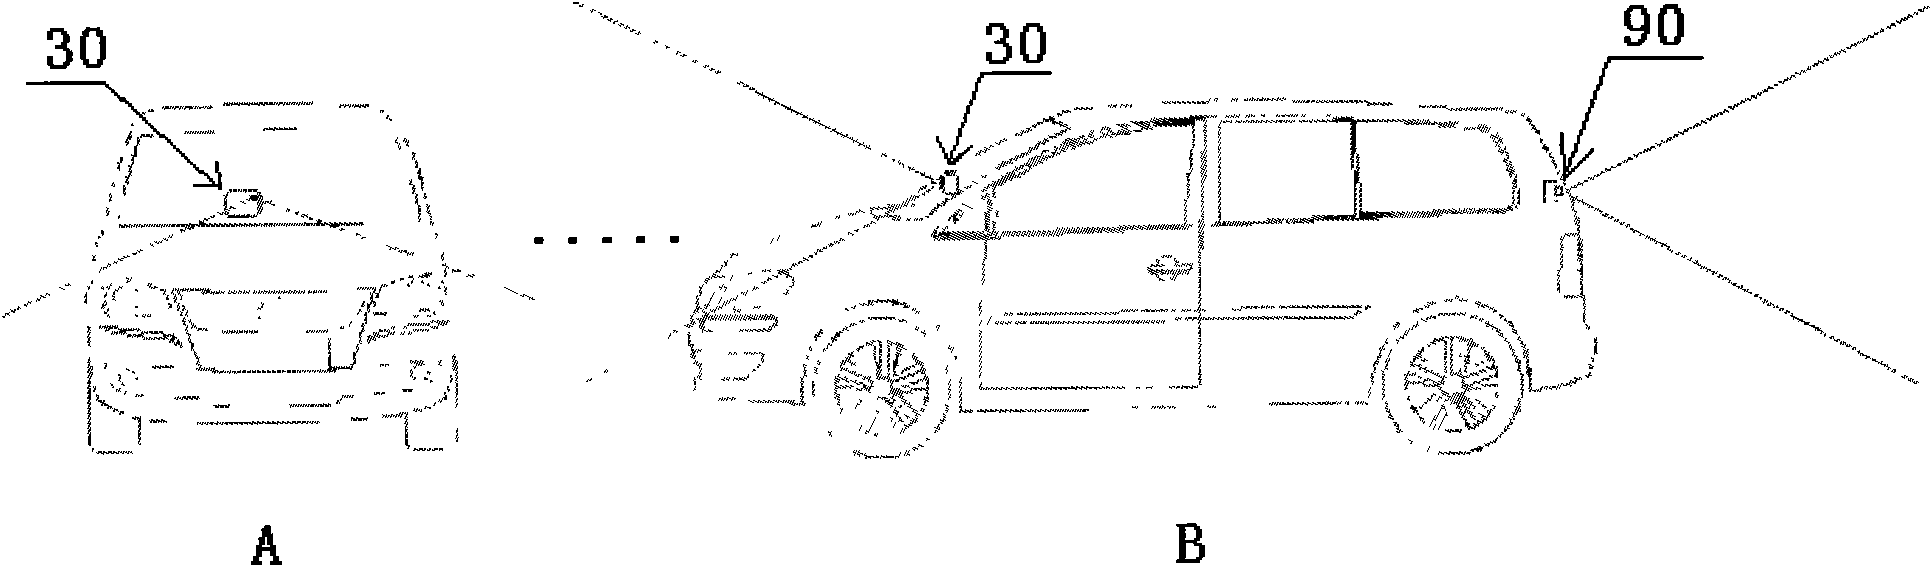 Vehicle-bone navigation and video recording integration system and method